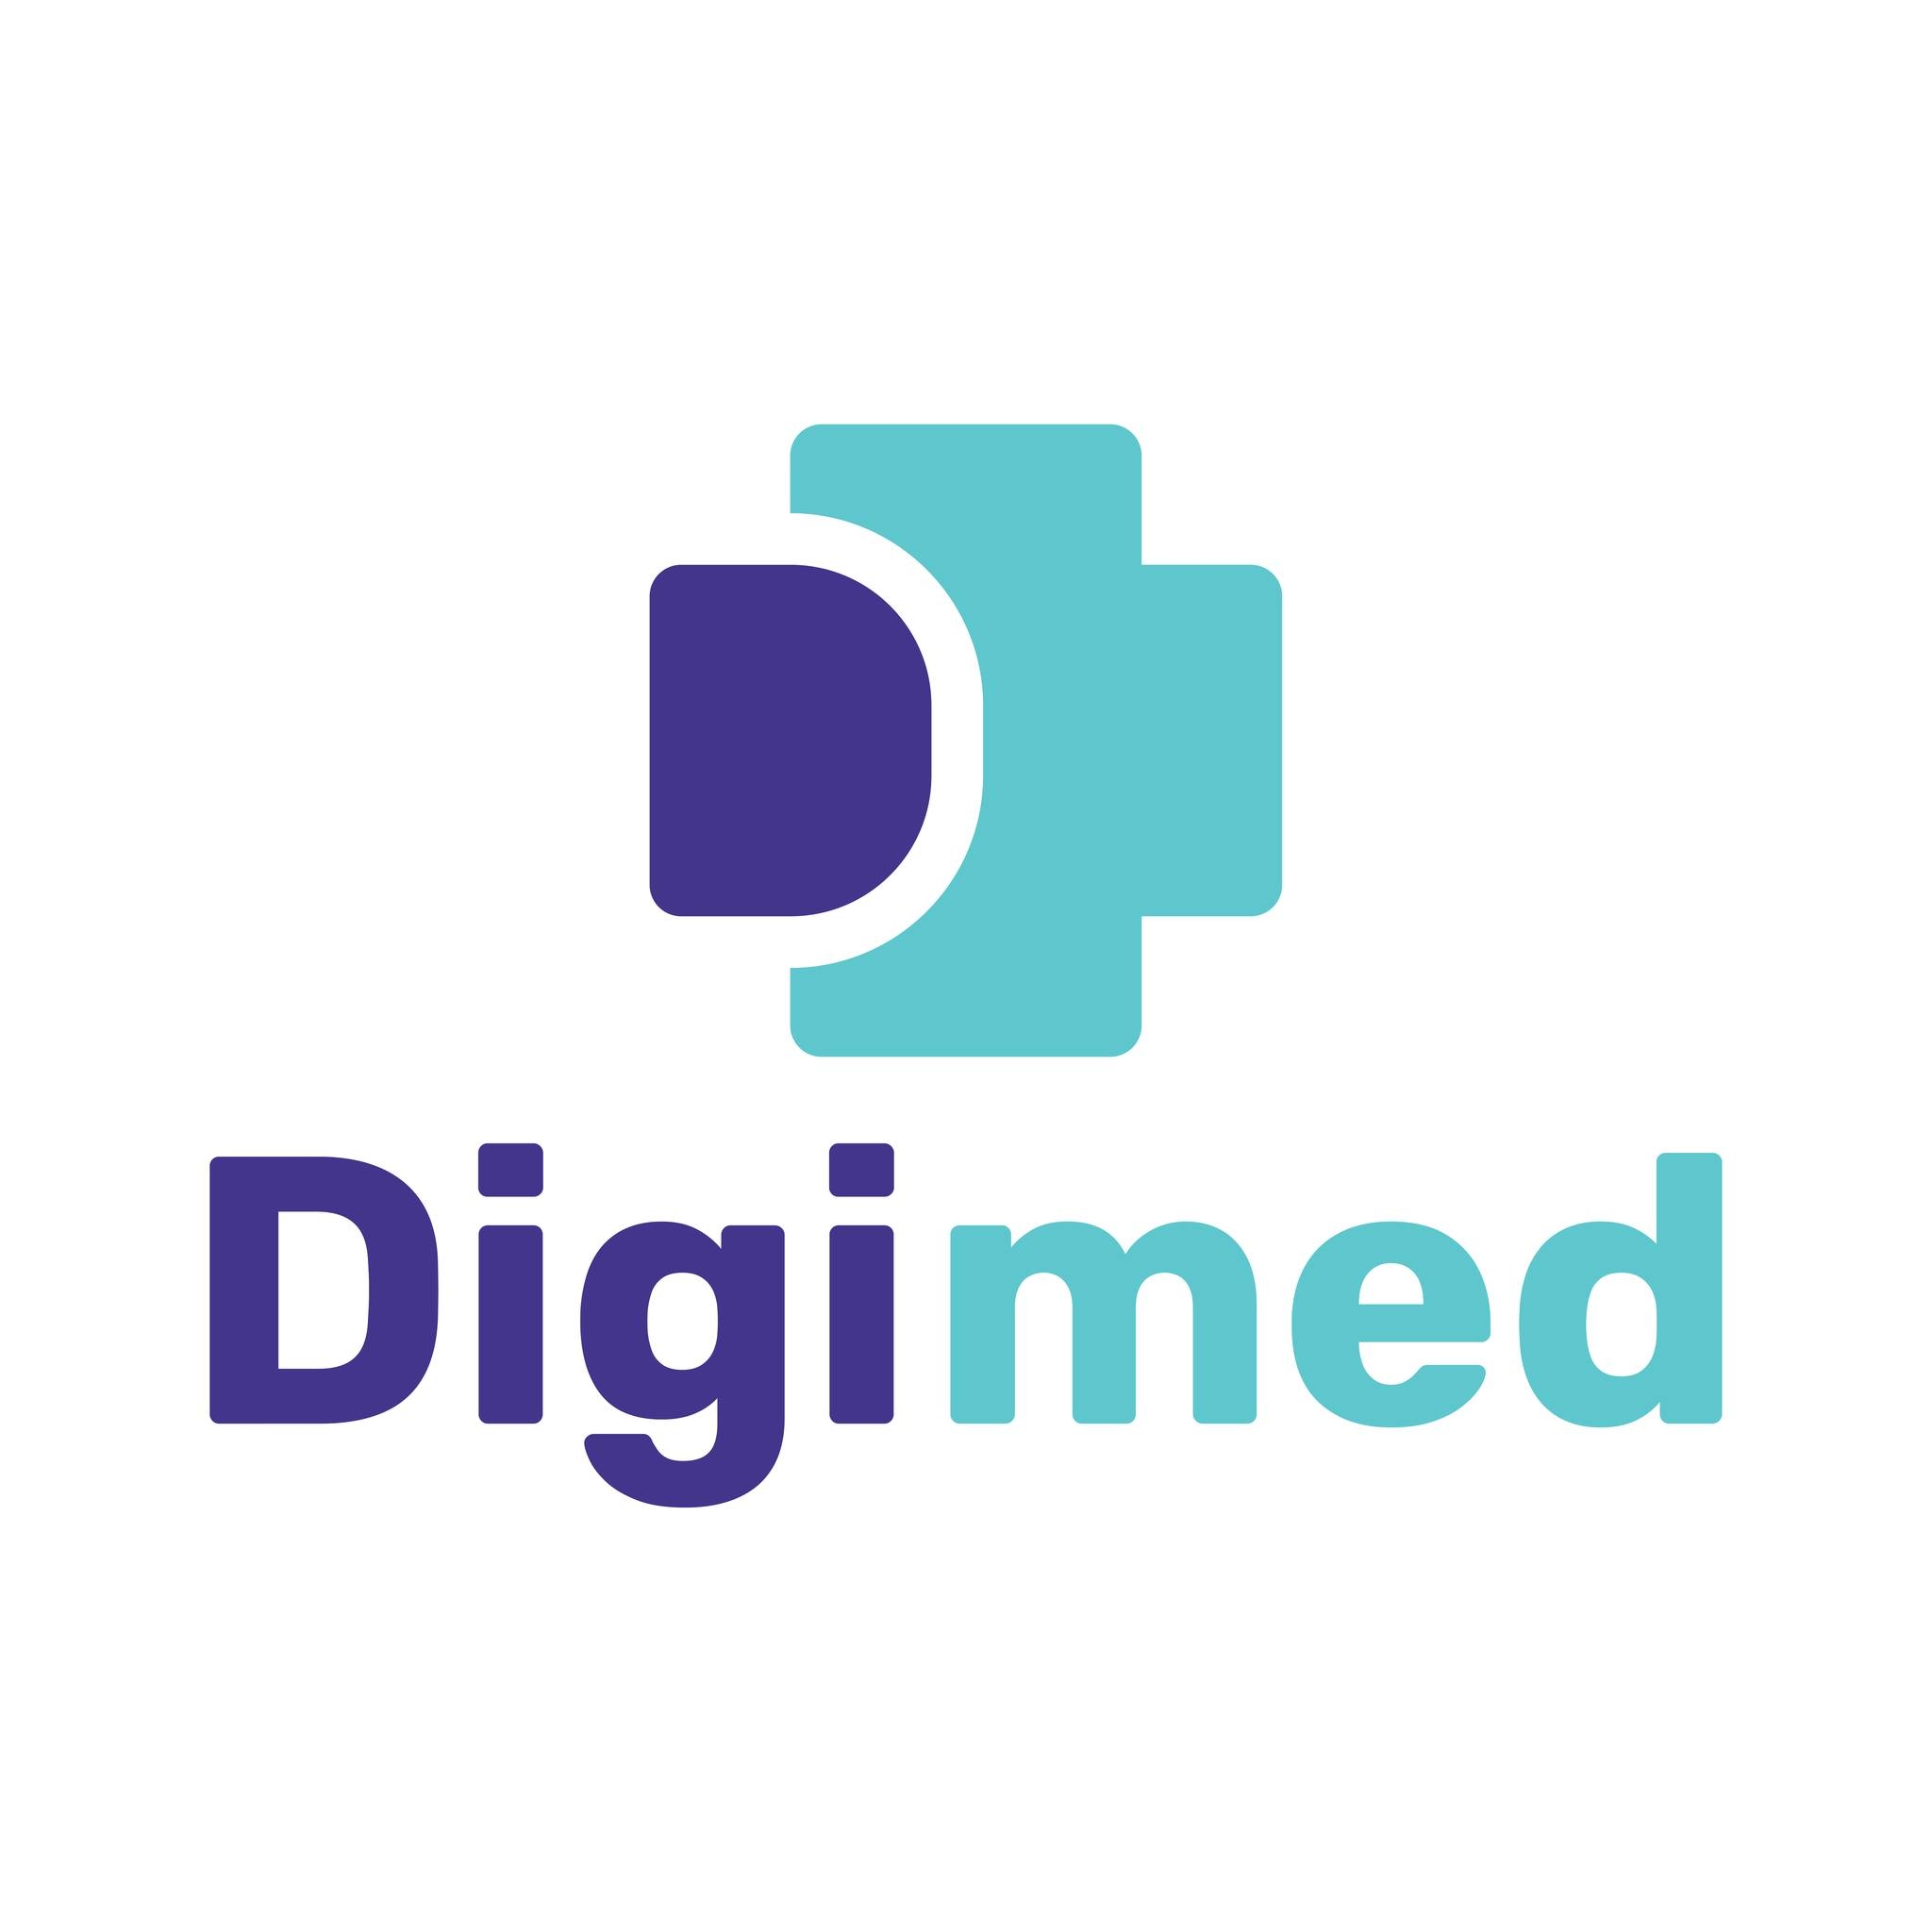 Saint James Hospital Group partners with DIGIMED